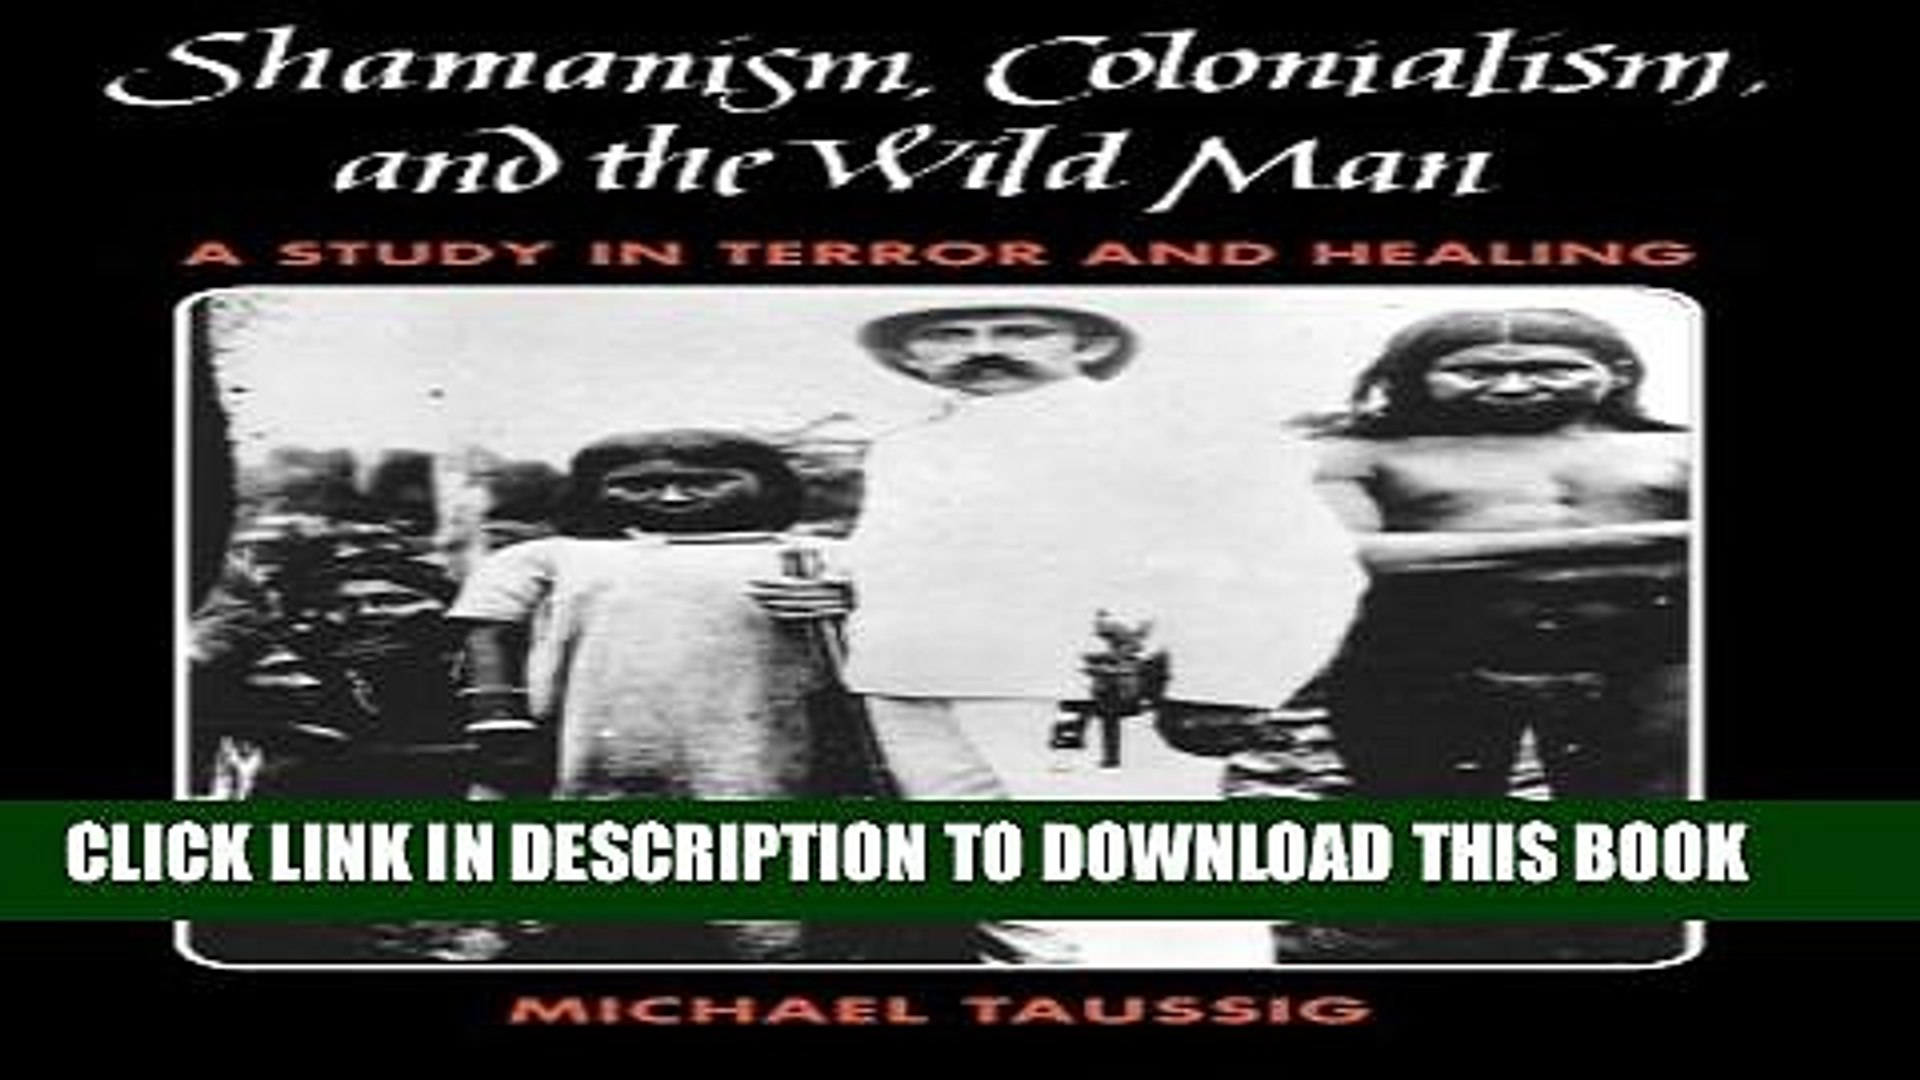 Shamanism A Study in Terror and Healing and the Wild Man Colonialism